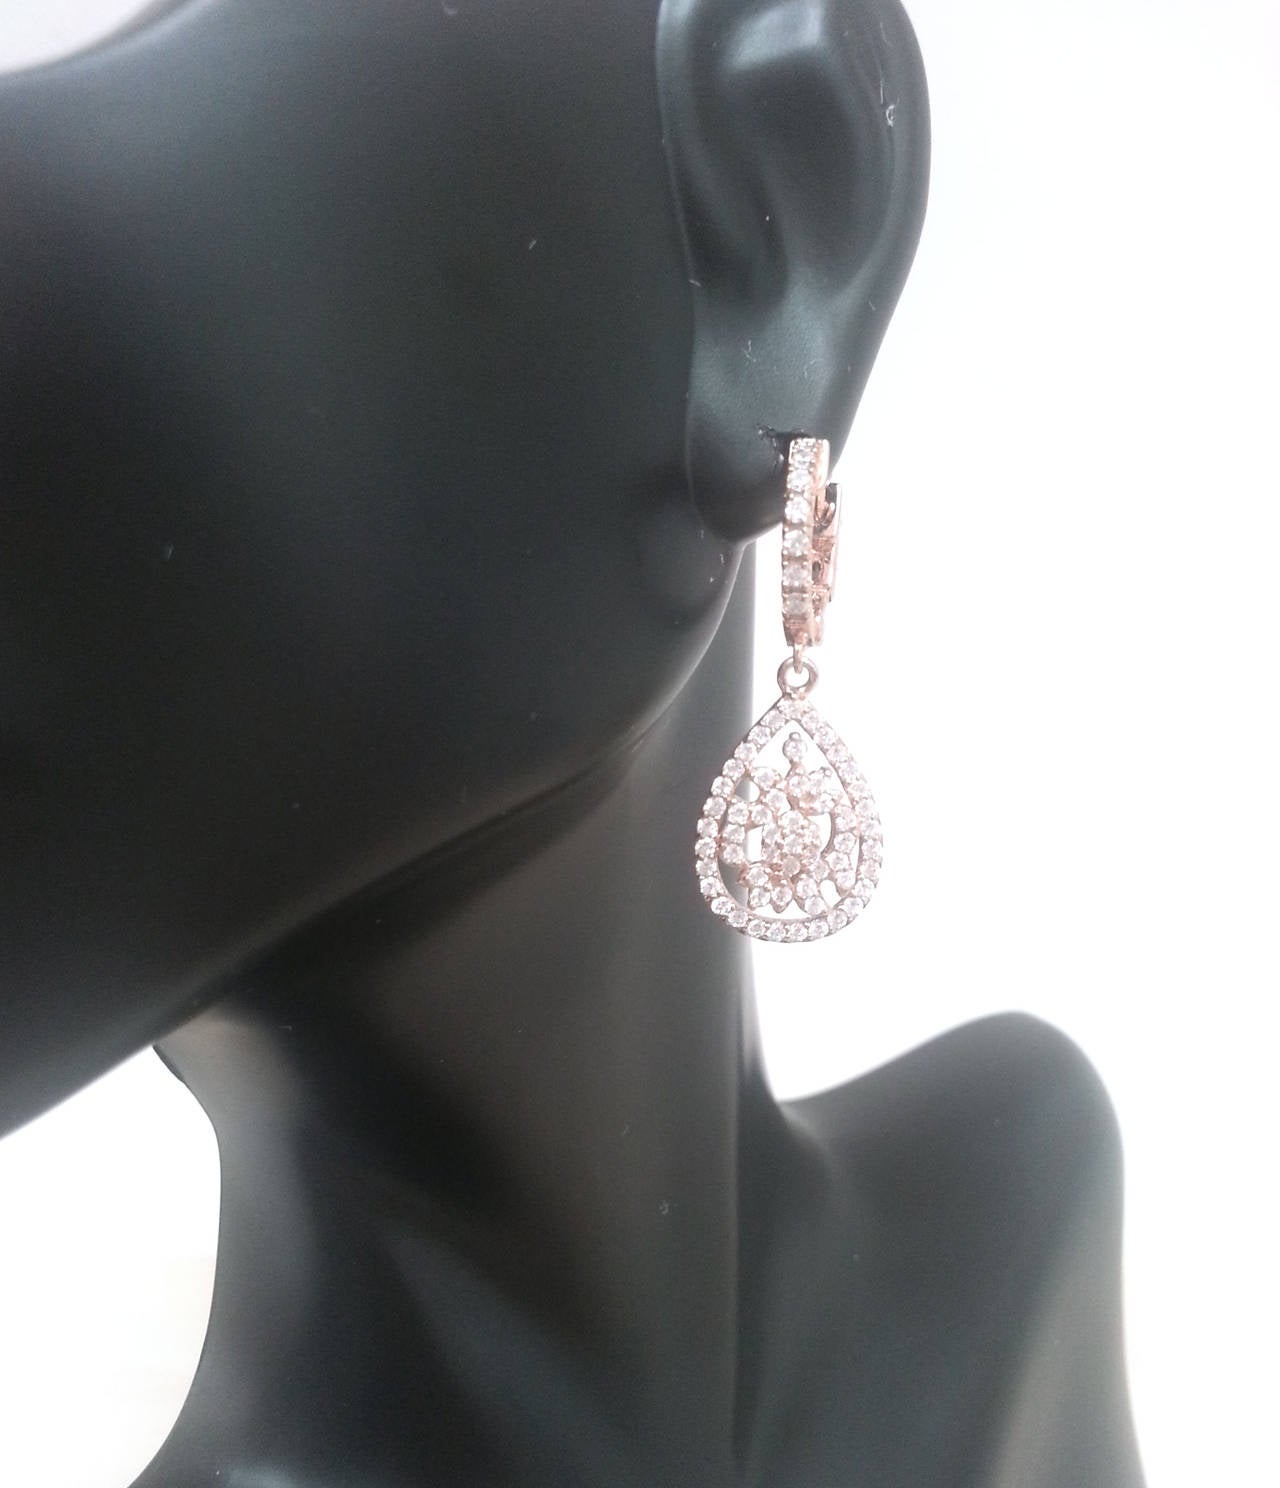 These earrings were set in 14k rose gold (also available in all other gold colors or 18k) set with 22 colorless round diamonds VS clarity. The earrings feature a unique push lock which needs to be pressed down to open the huggie.